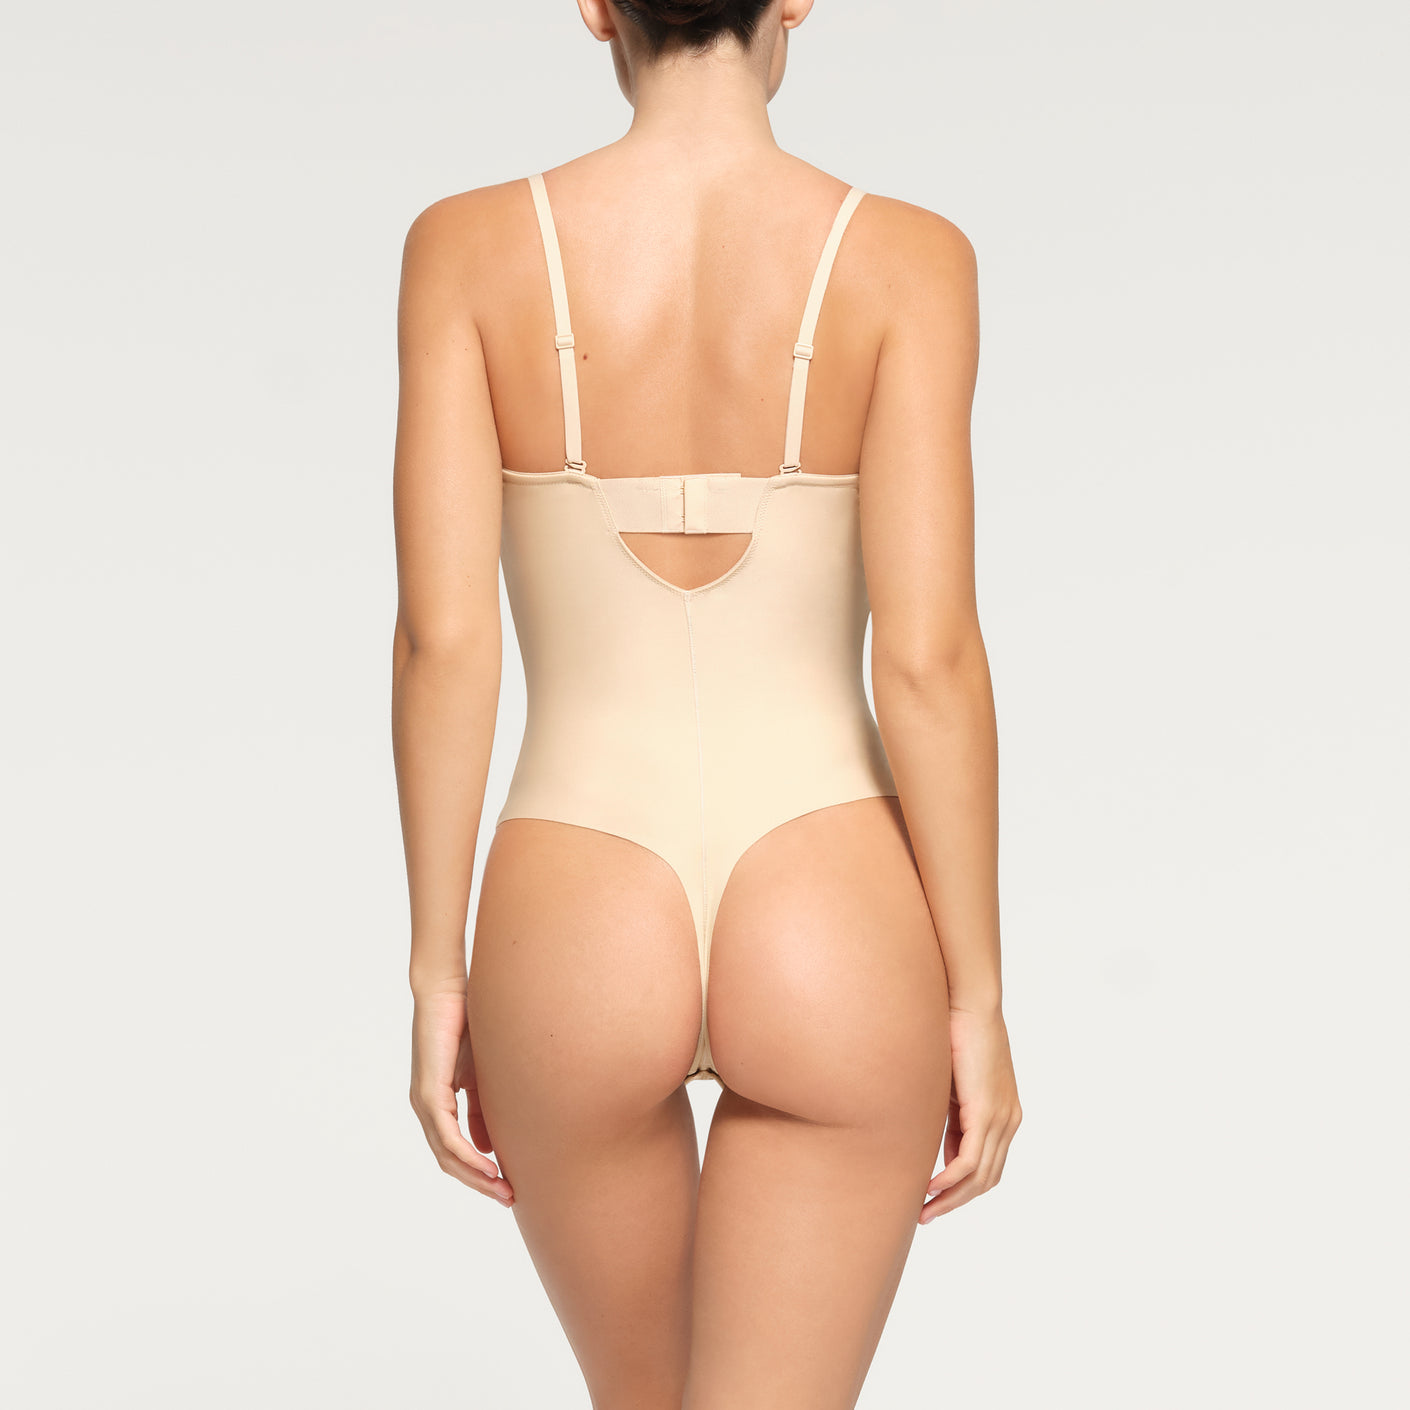 Skims core control high waisted thong XS, Women's Fashion, New  Undergarments & Loungewear on Carousell